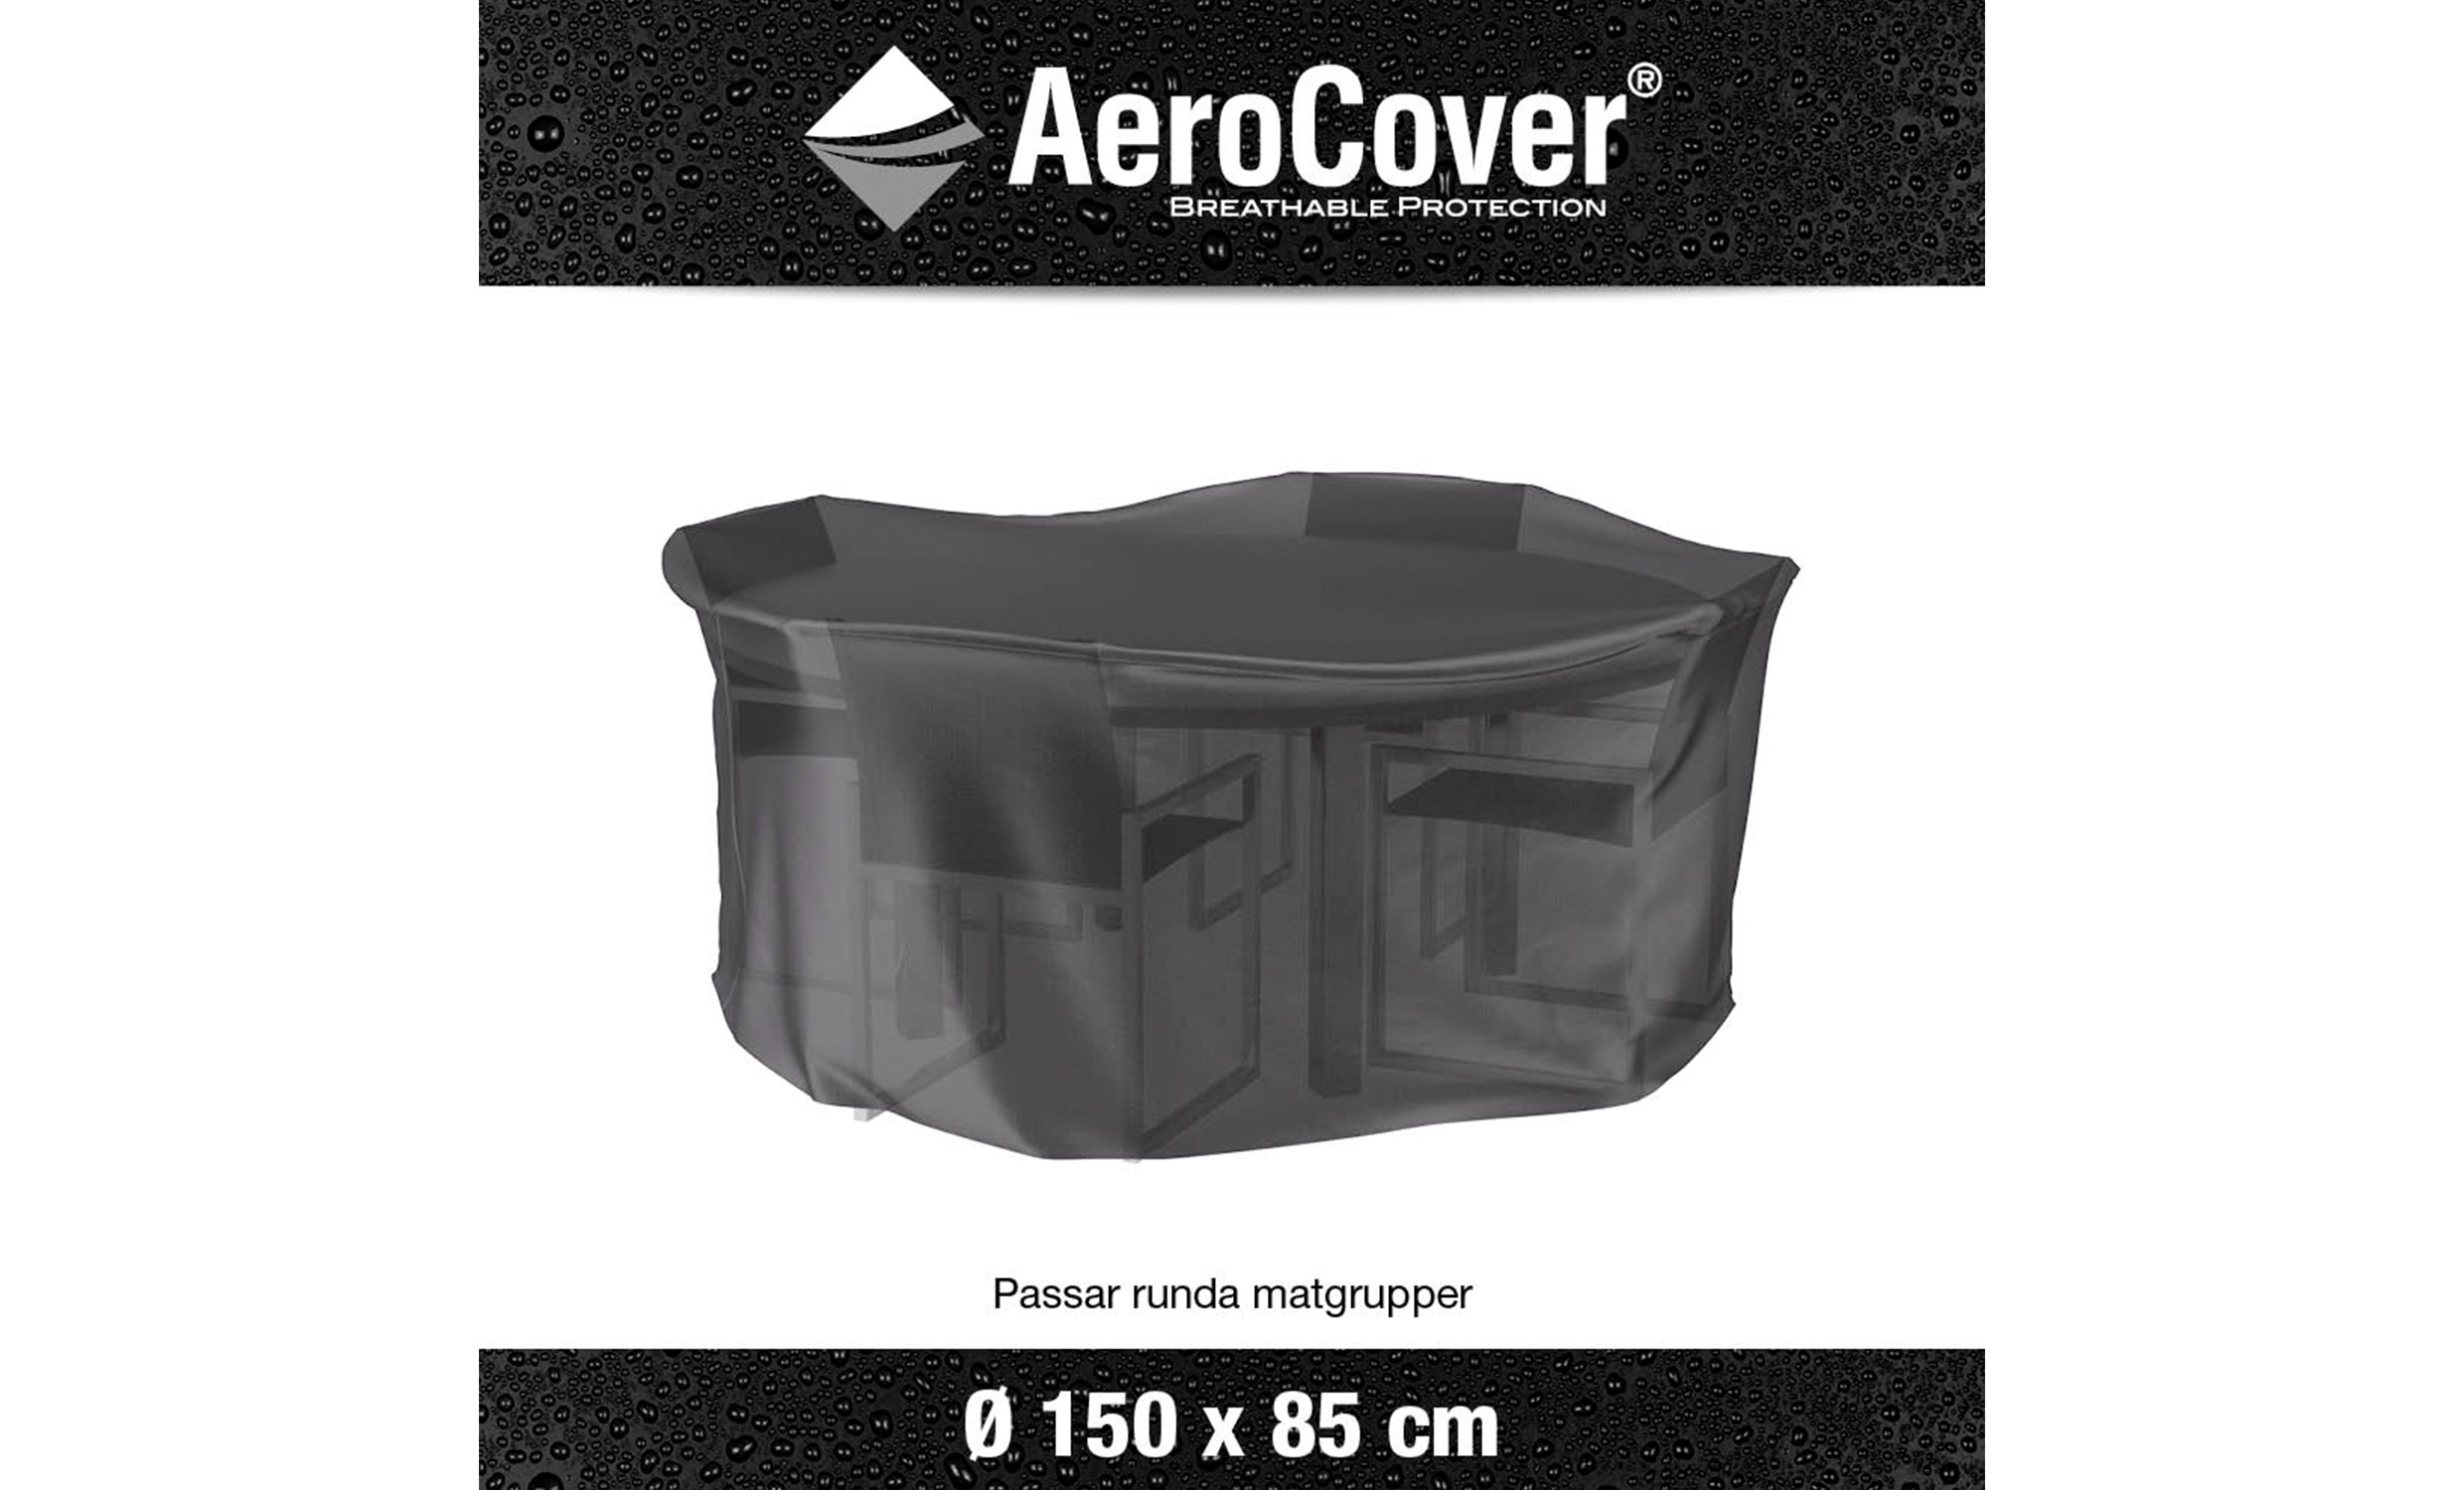 AEROCOVER Mbelskydd Antracit 150xH85